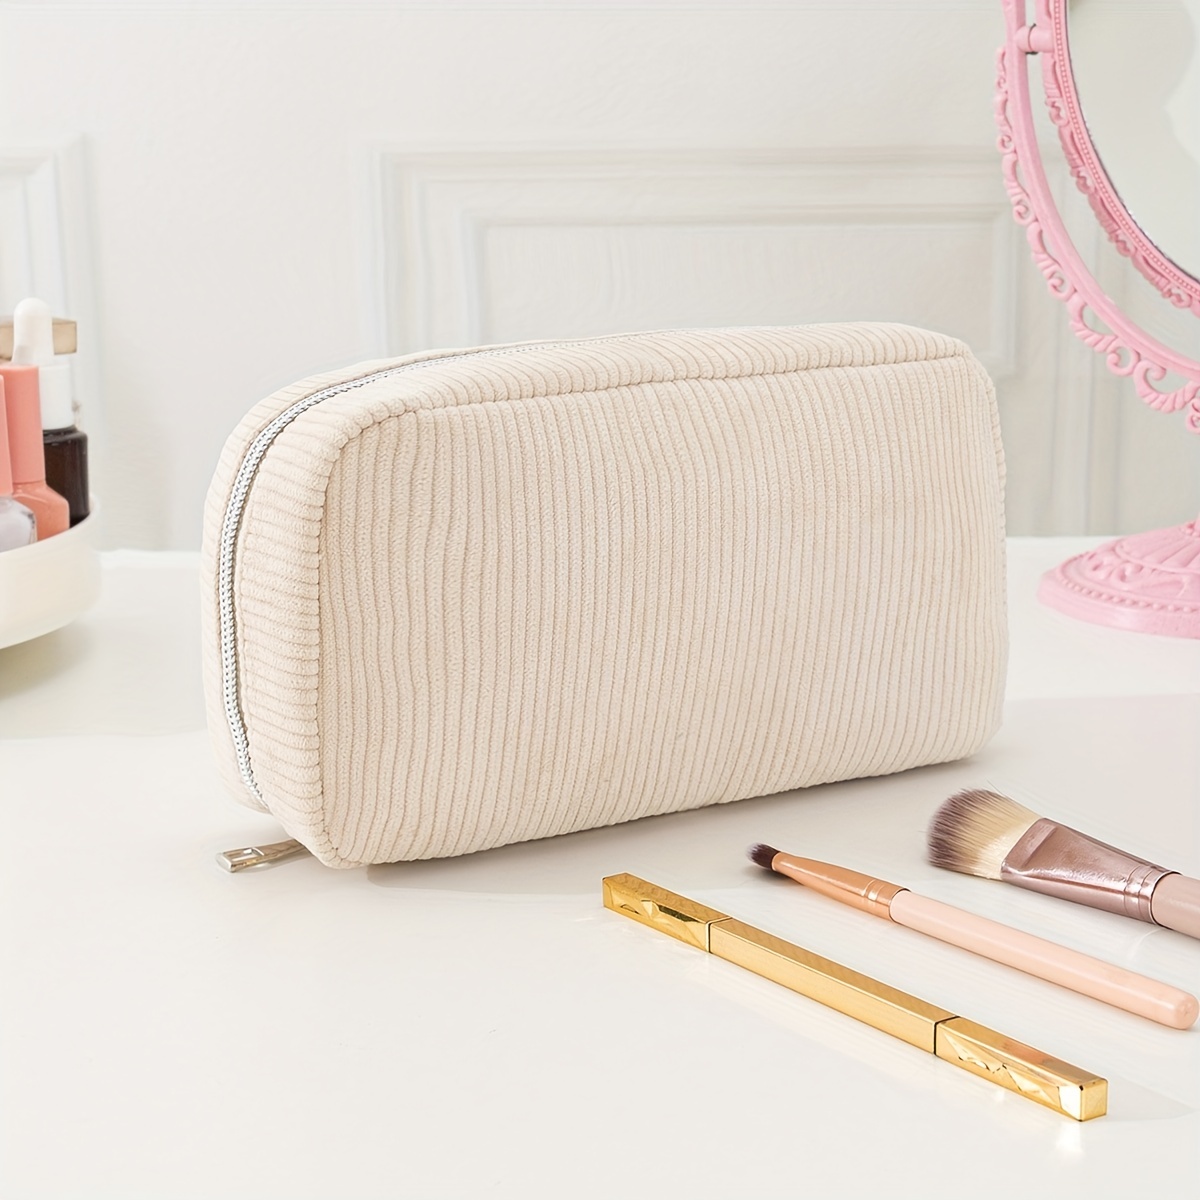 

Corduroy Cosmetic Bag With Silvery Zipper Simple Roomy Portable To Carry Multifunctional Toiletry Bag Suitable For Home Or Travel Storage